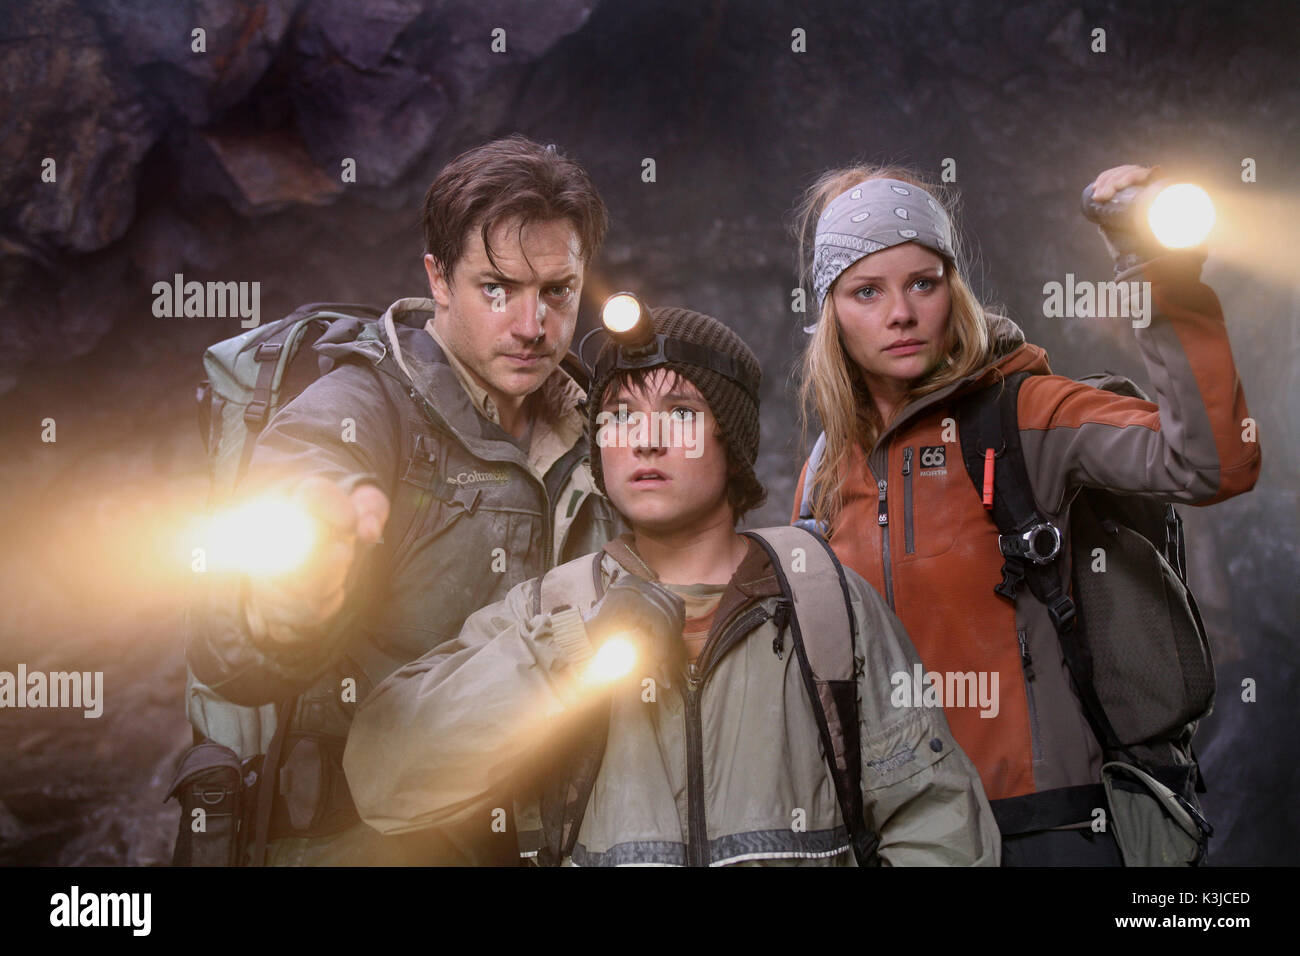 JOURNEY TO THE CENTER OF THE EARTH 3D BRENDAN FRASER, JOSH HUTCHERSON, ANITA BRIEM JOURNEY TO THE CENTER OF THE EARTH 3D     Date: 2008 Stock Photo